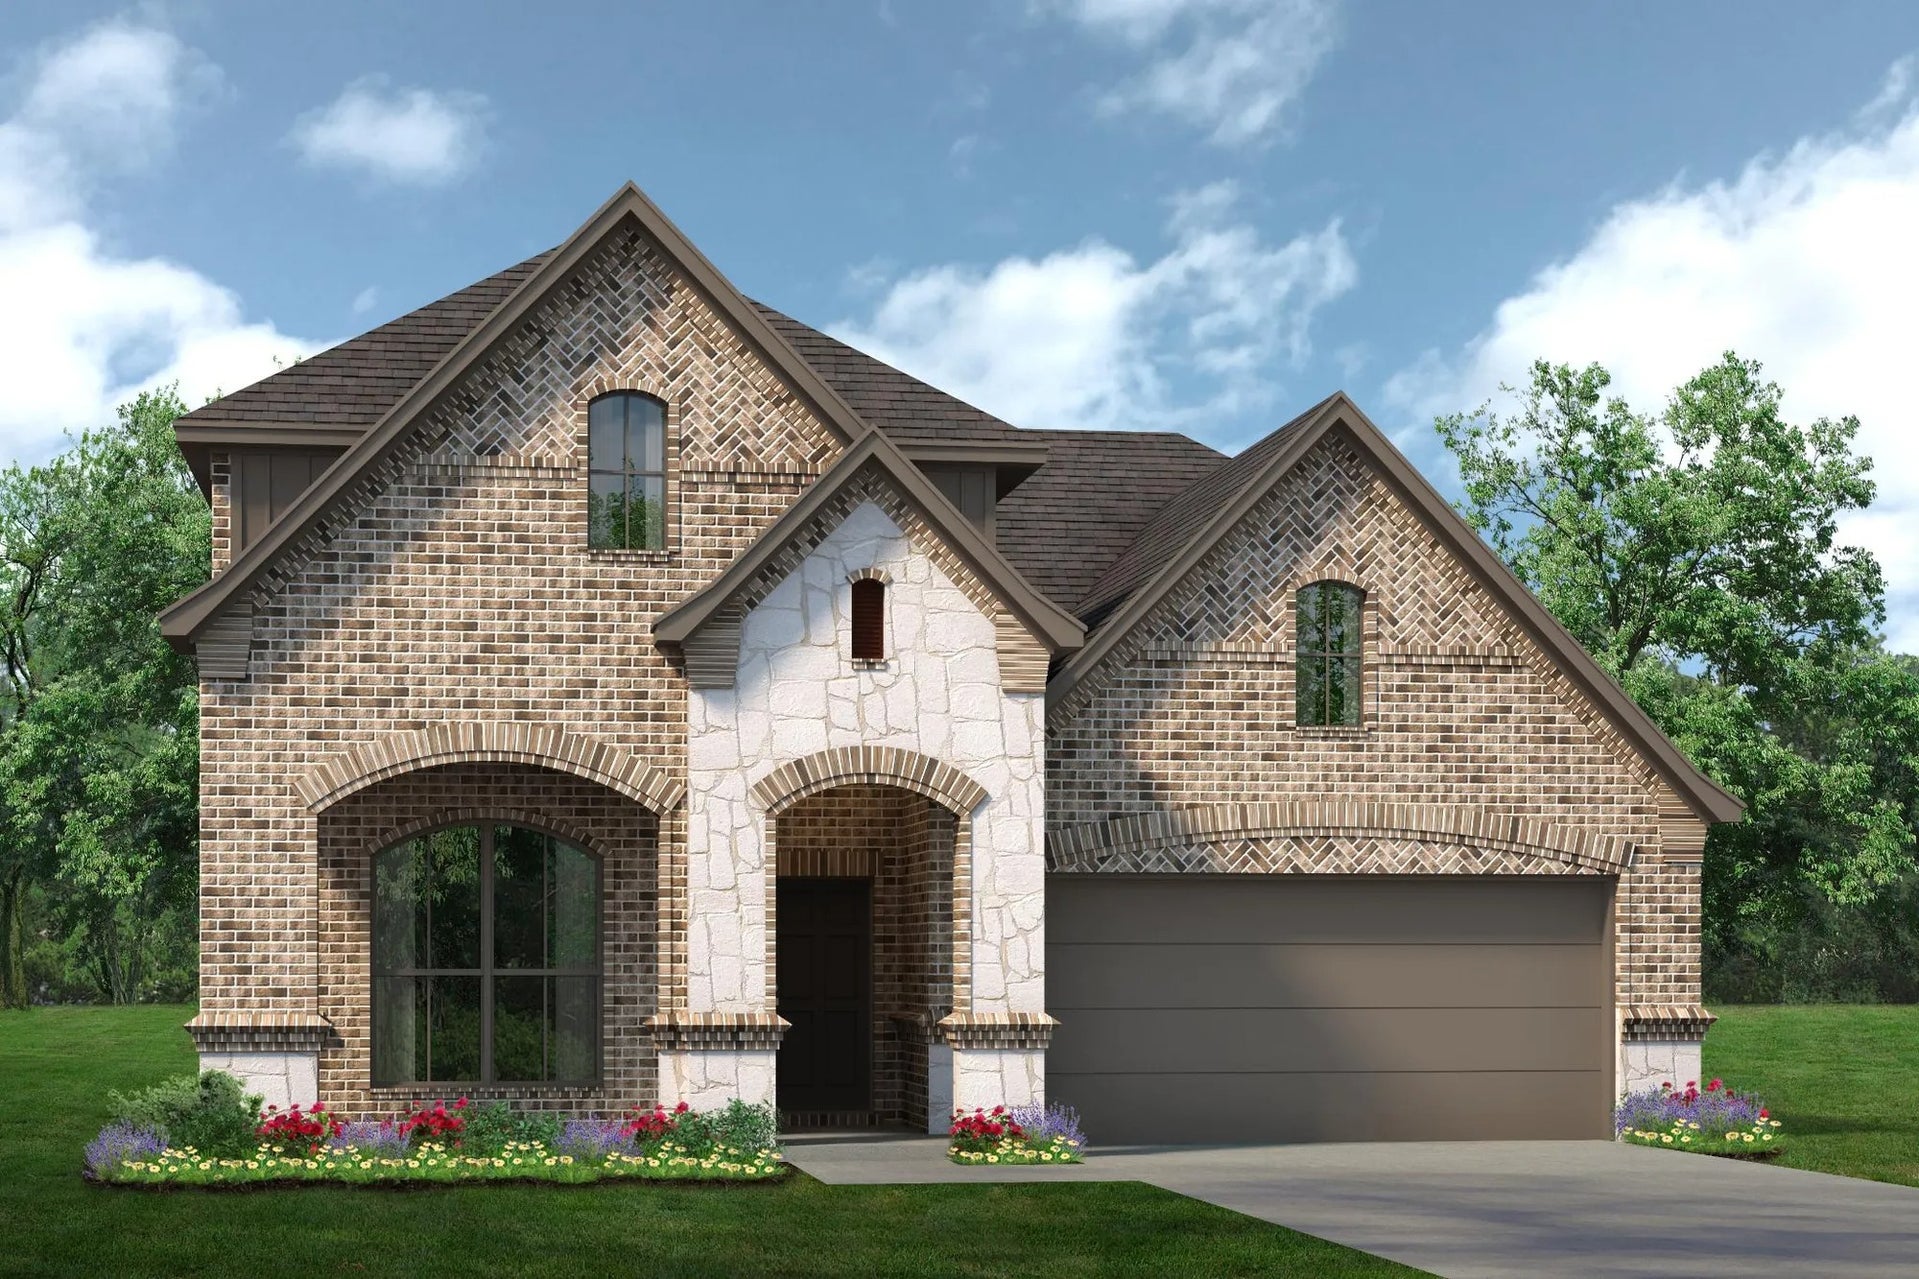 2440 D. 2,440sf New Home in Fort Worth, TX